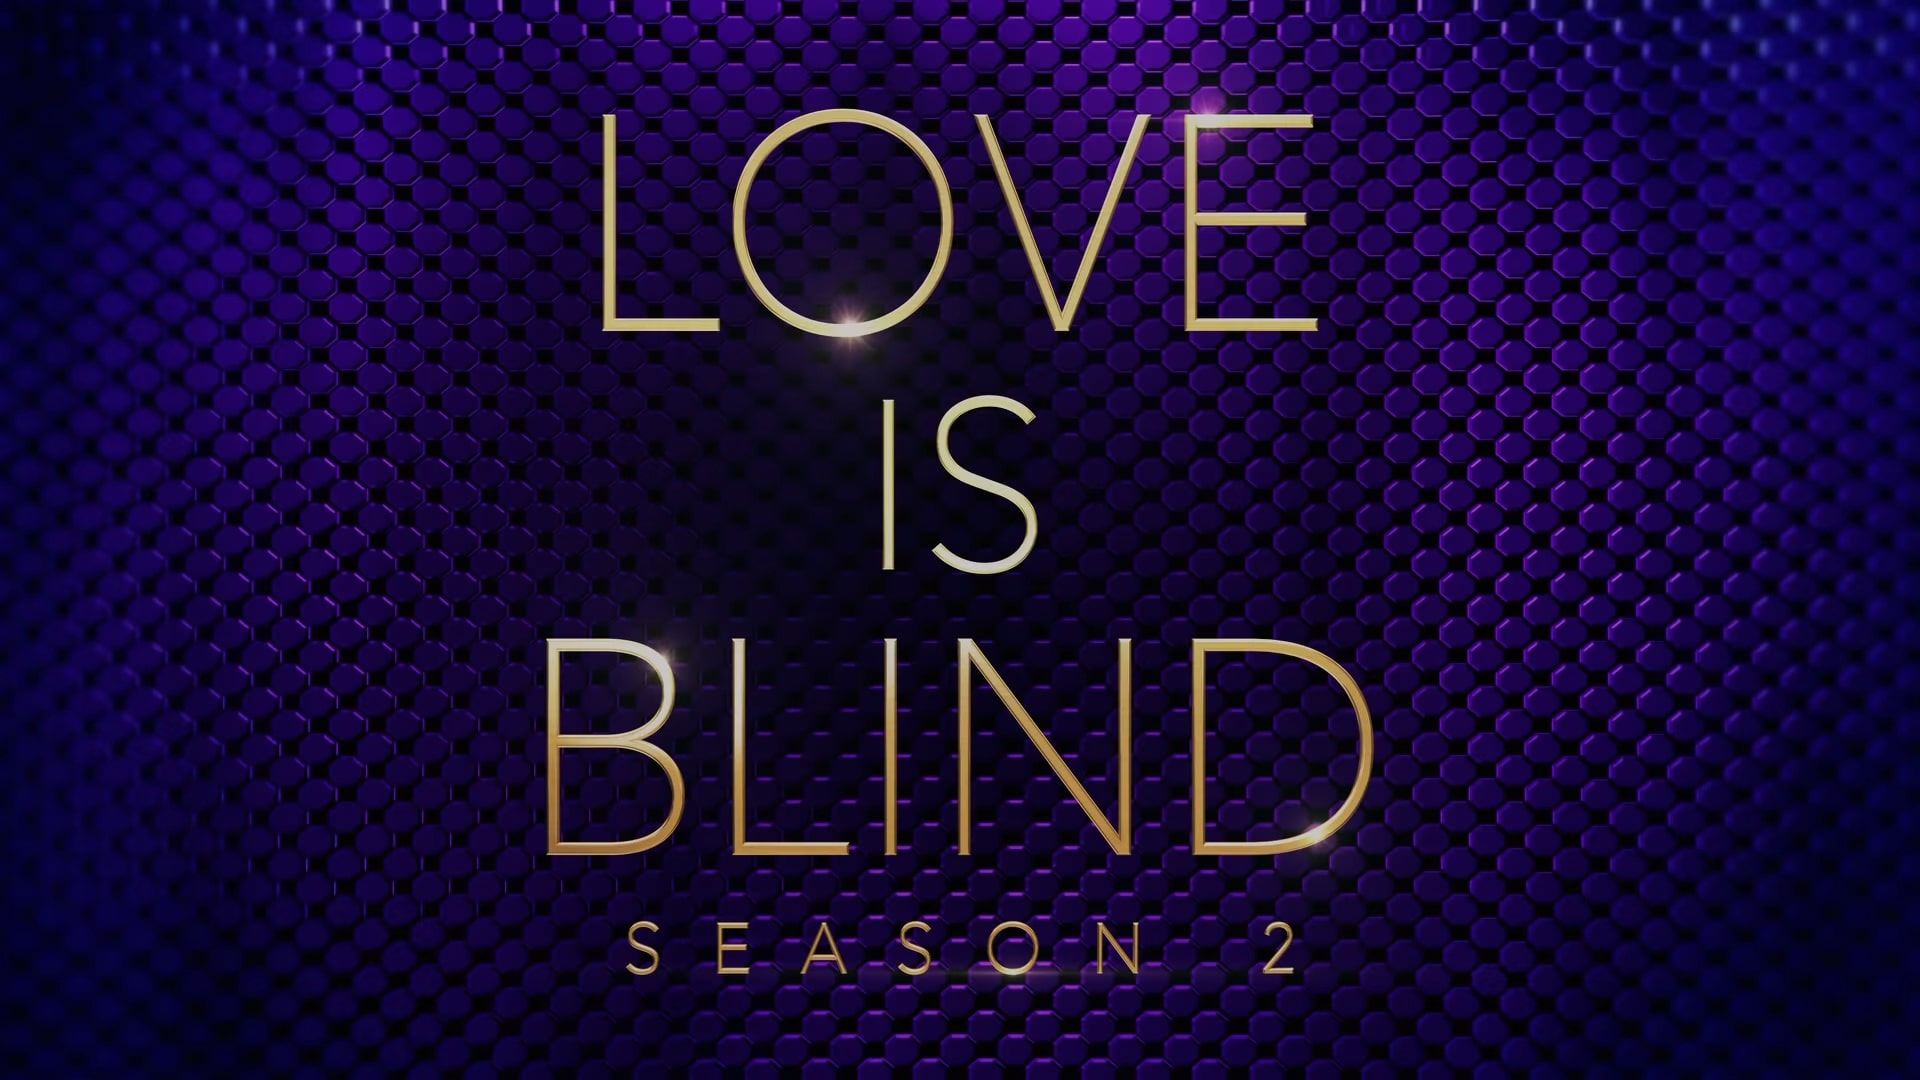 Love is Blind Season 2 Trailer, Coming to Netflix in February 2022